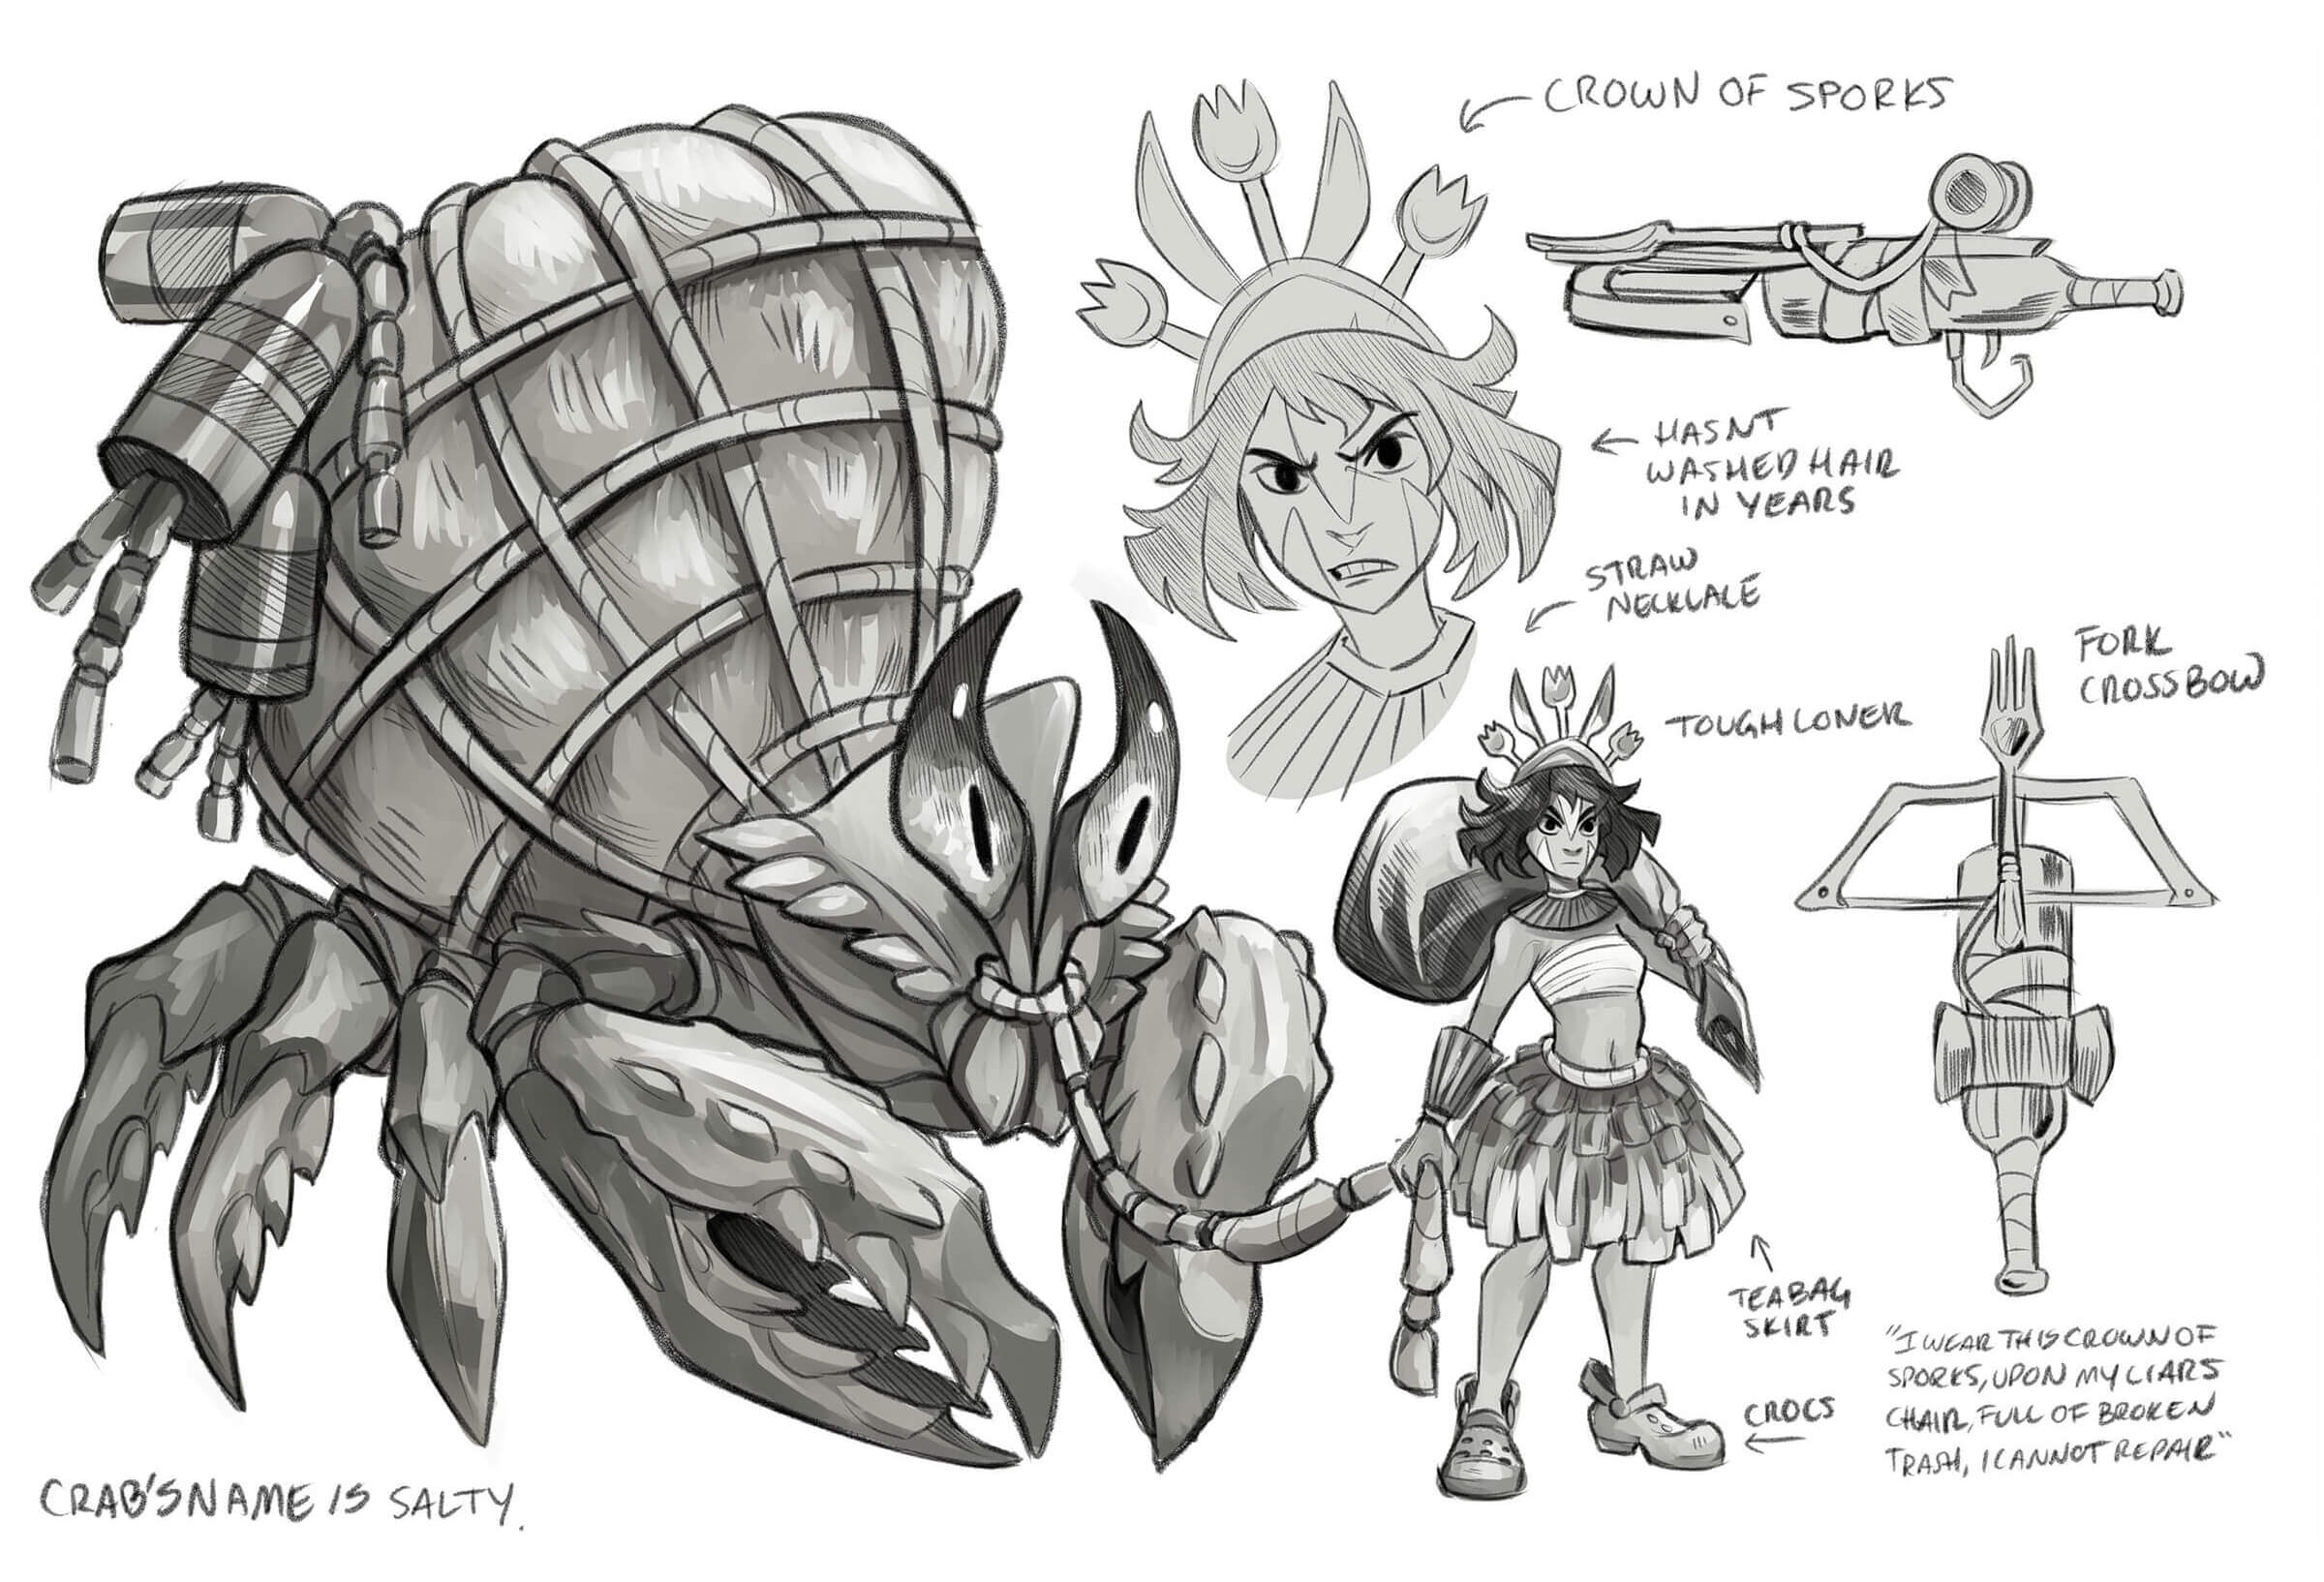 Sketches of a giant, captured hermit crab